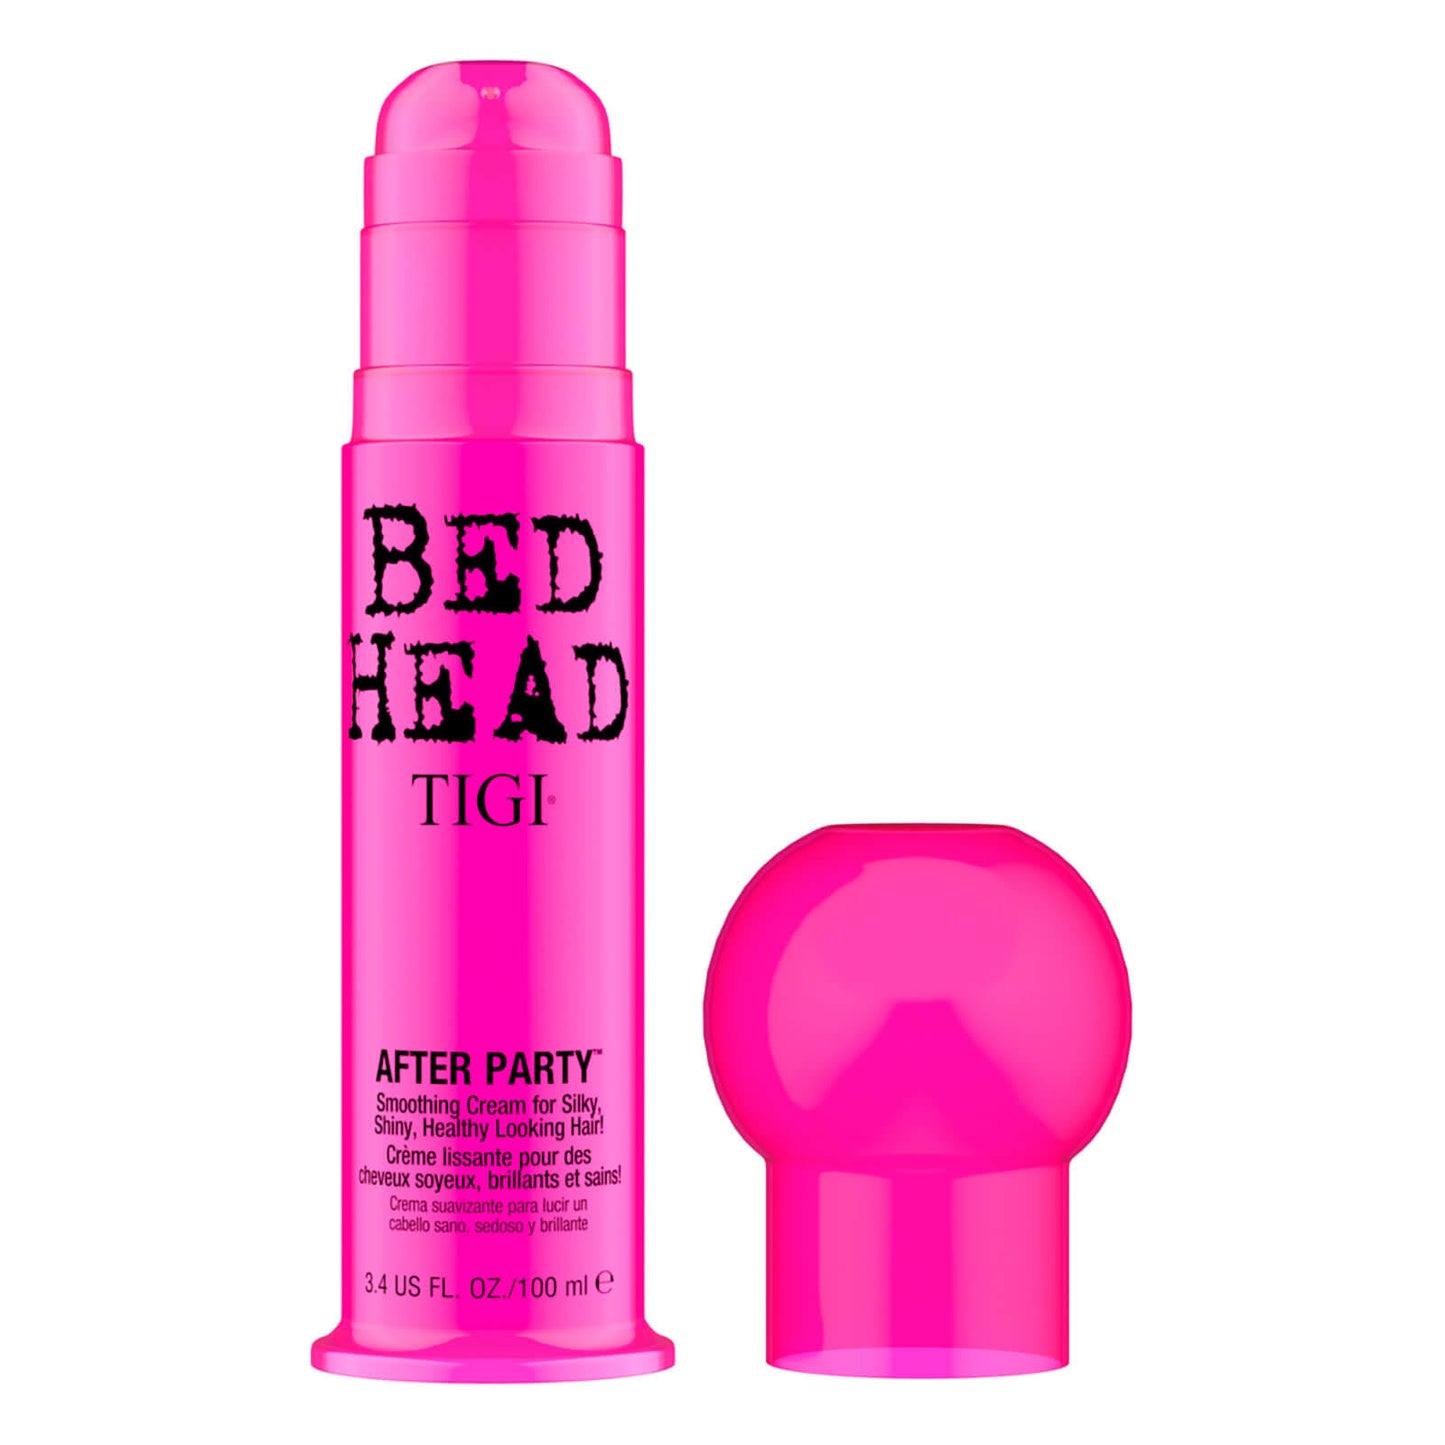 Bed Head TIGI After Party Super Smoothing Cream